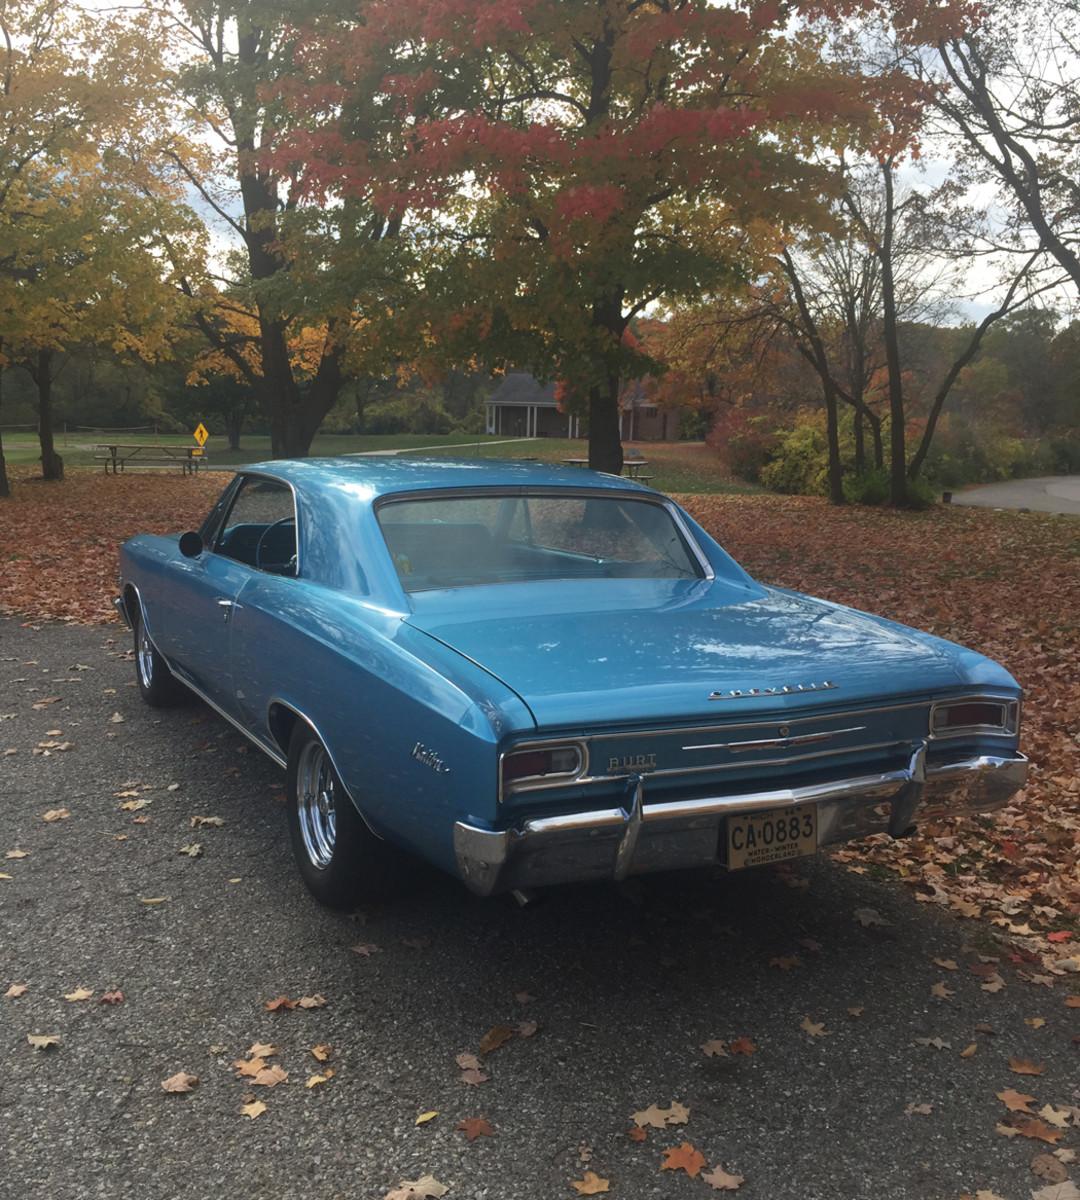 The rear window and tail panel were concave and while they looked good, they created drag at speed. No matter on this Chevelle Malibu — it was built for cruising.